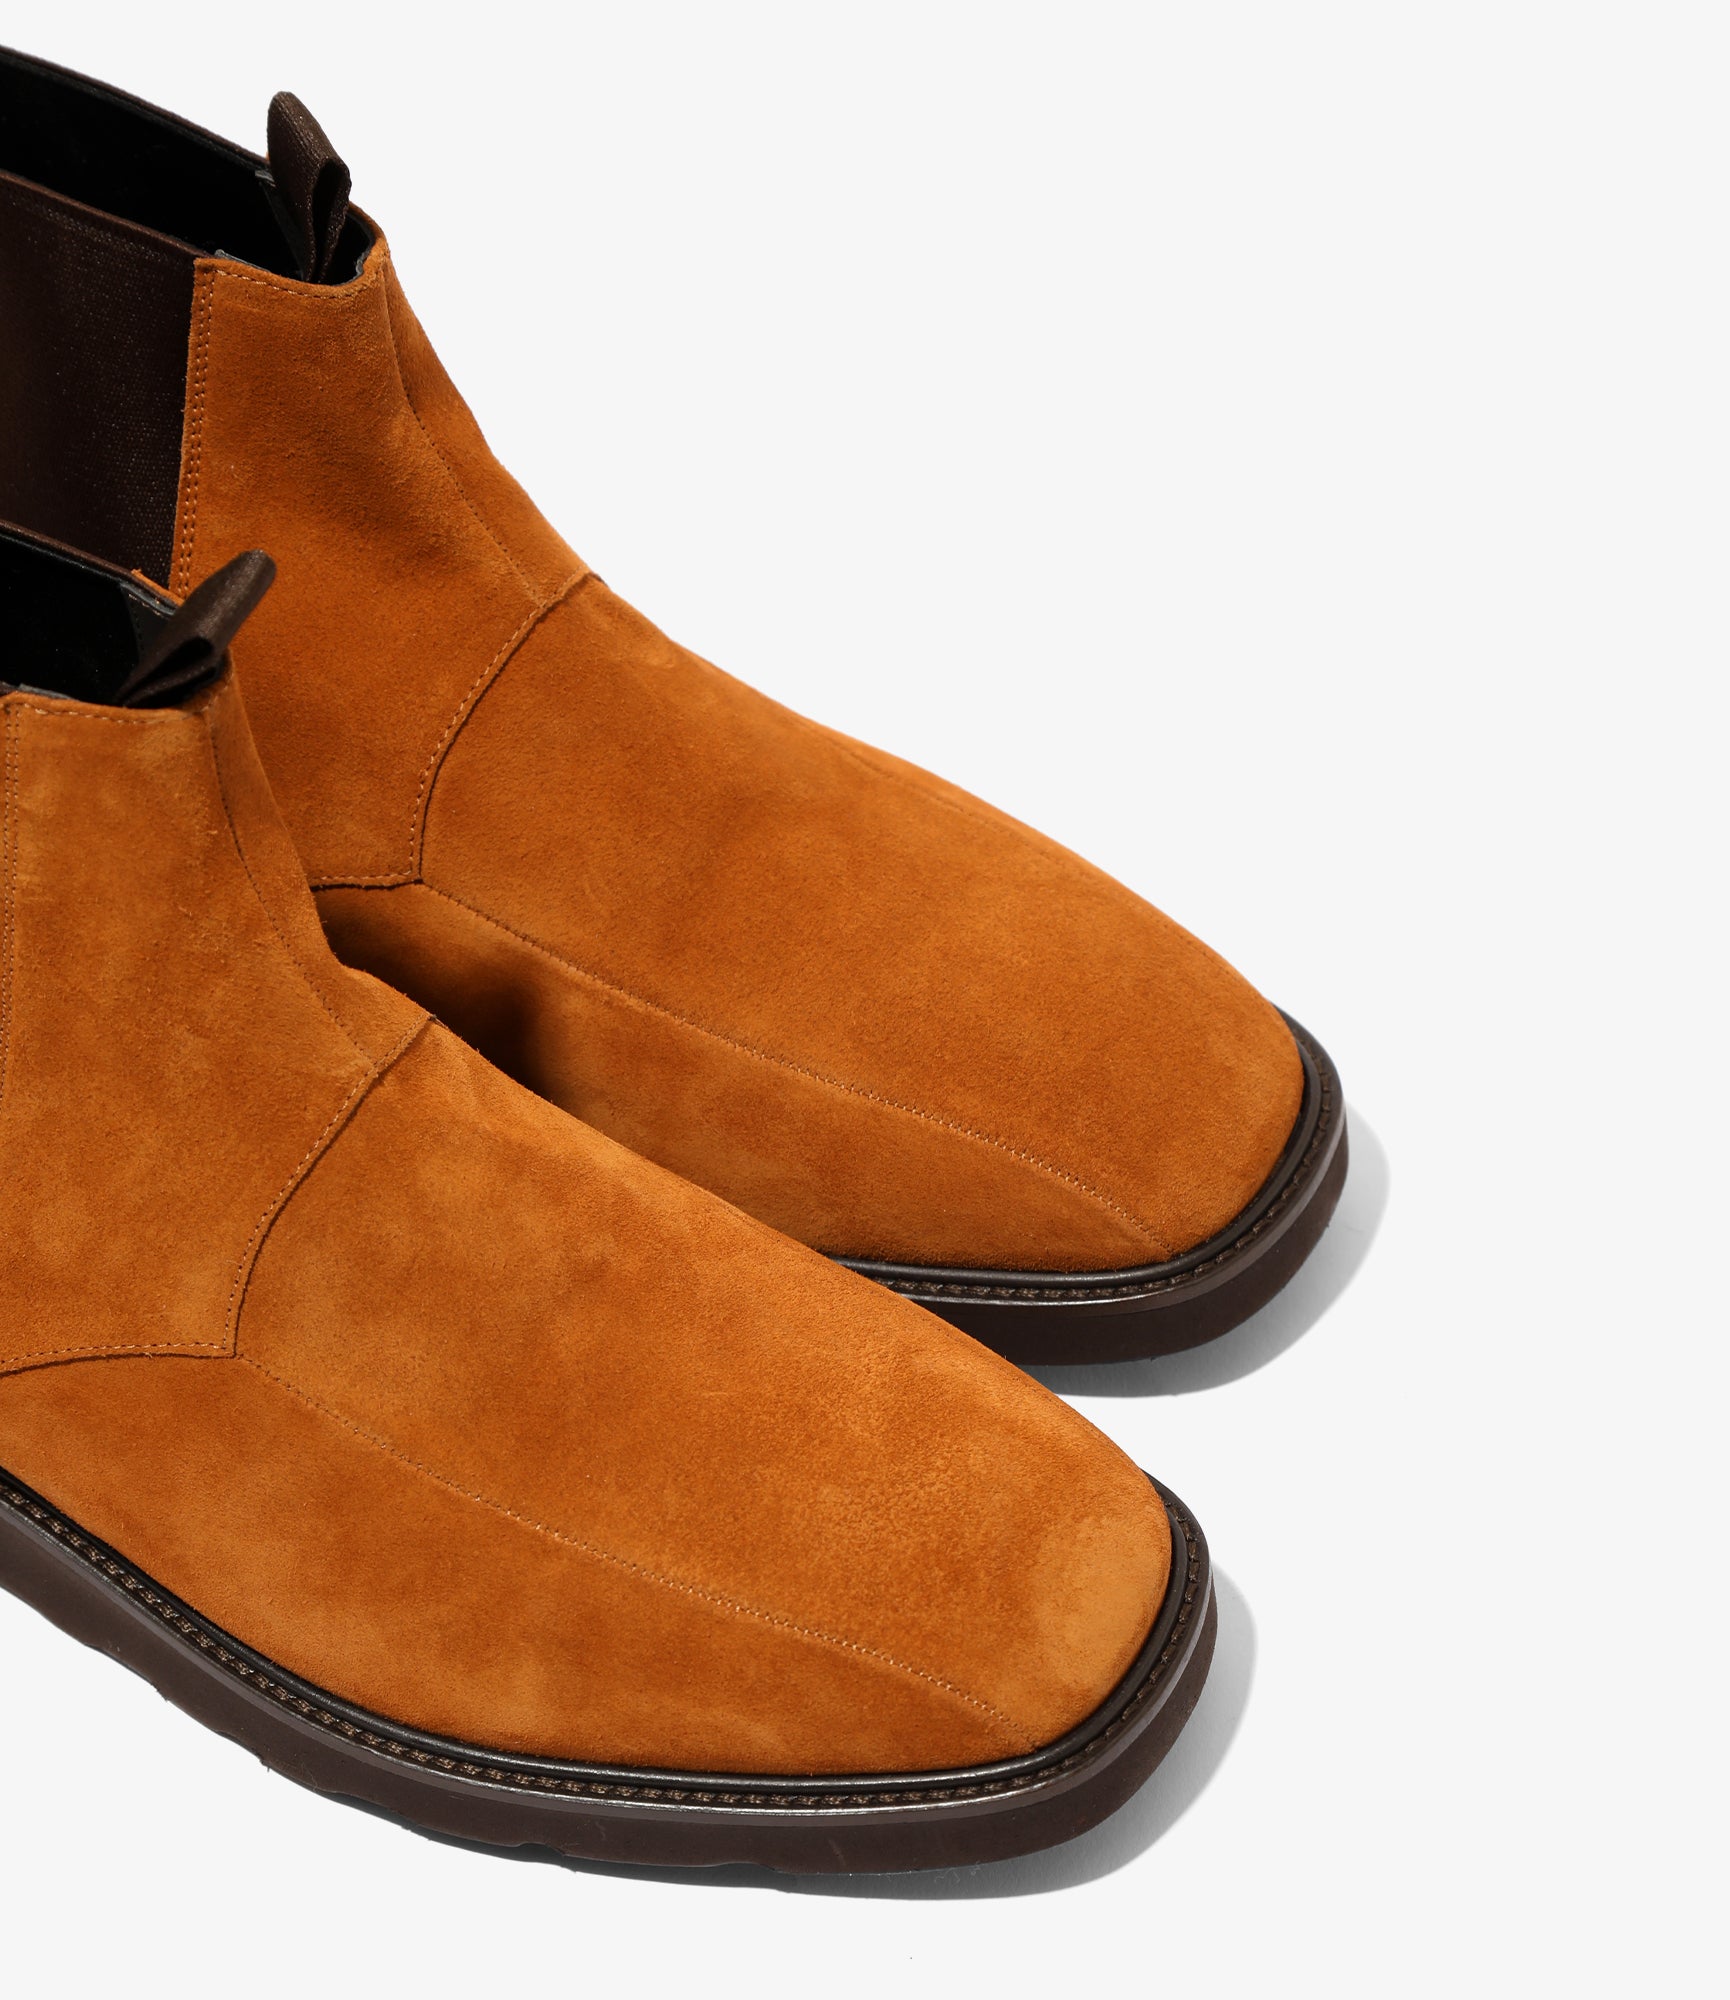 Needles Square Toe Chelsea Boot - Suede - Brown